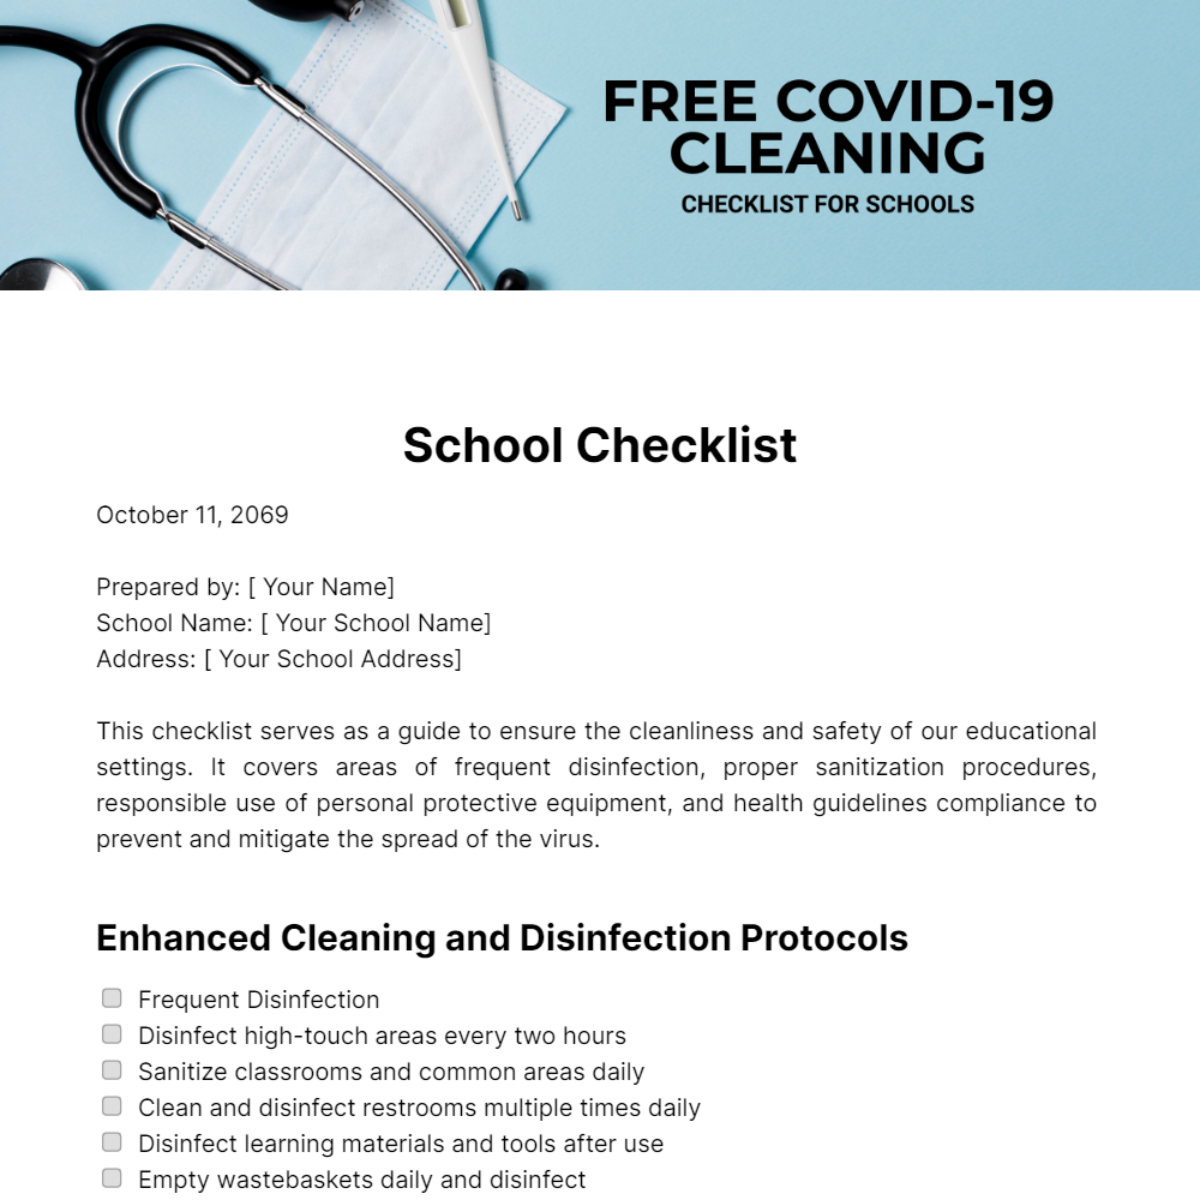 Free Covid-19 Cleaning Checklist for Schools Template